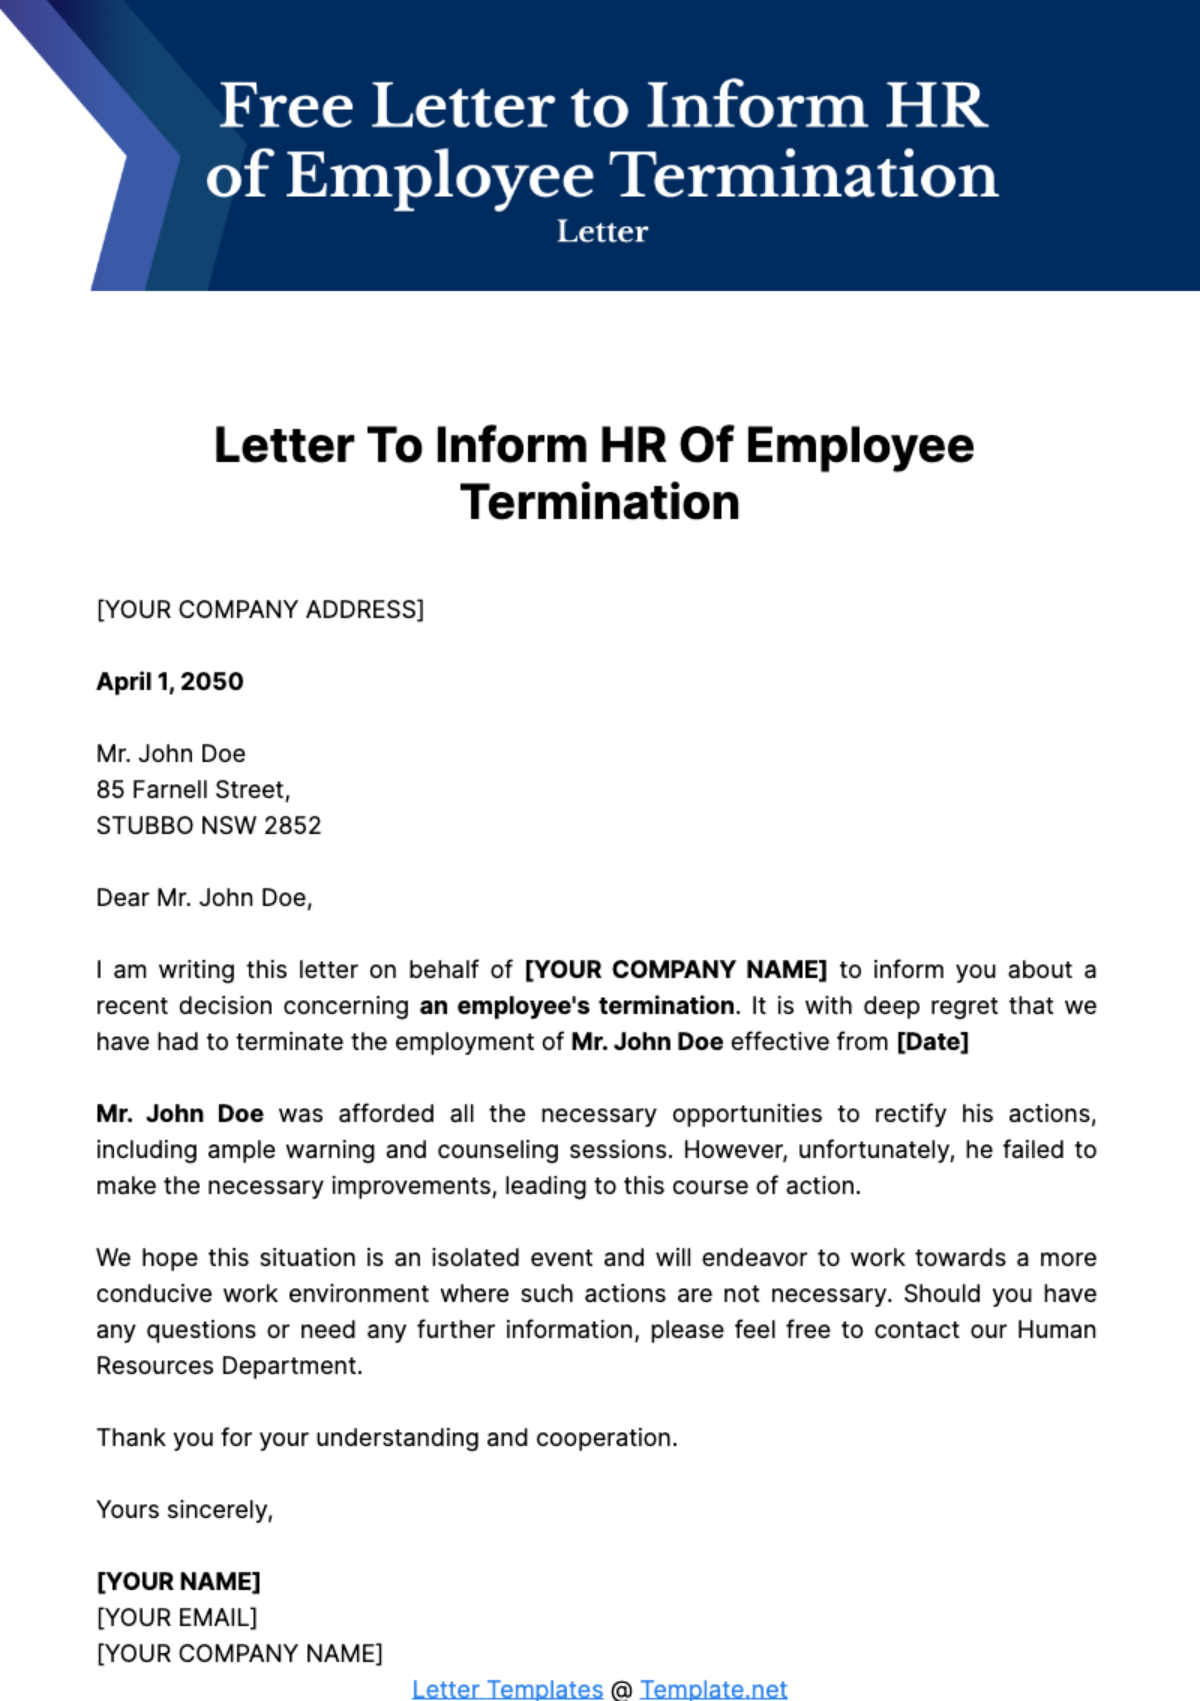 Free Letter to Inform HR of Employee Termination Template